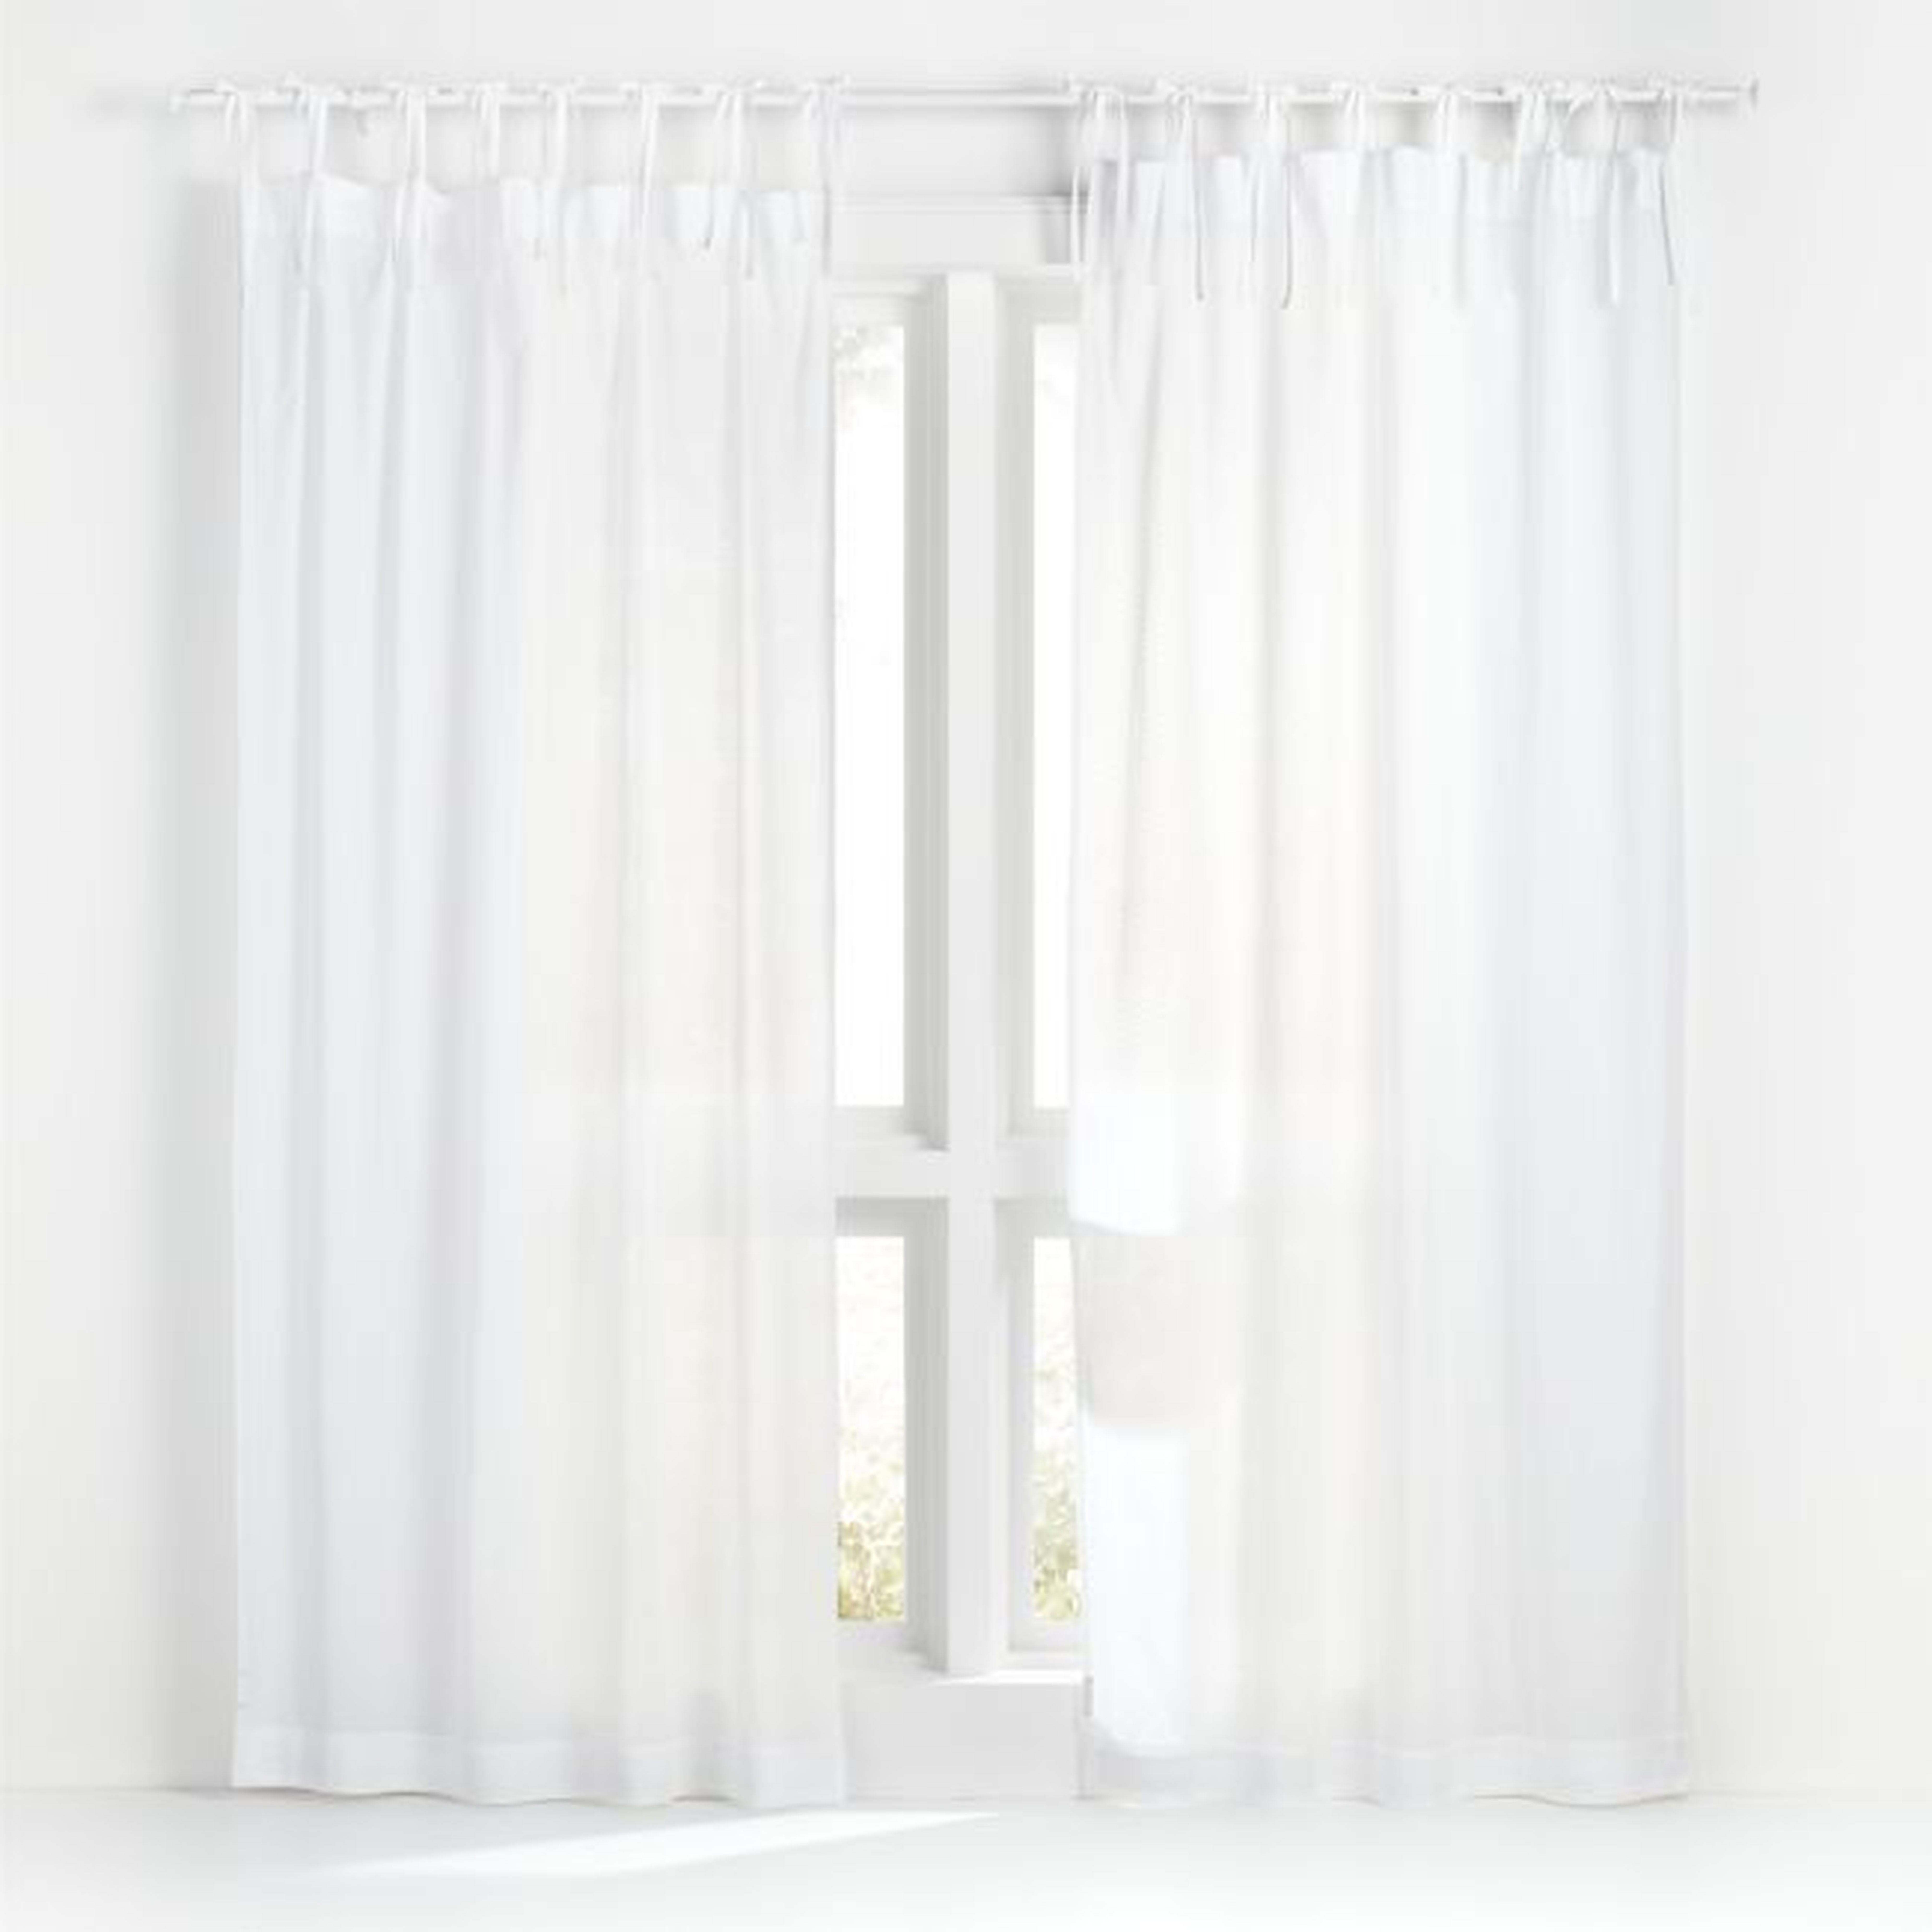 63" Sheer Dobby White Curtain Panel - Crate and Barrel